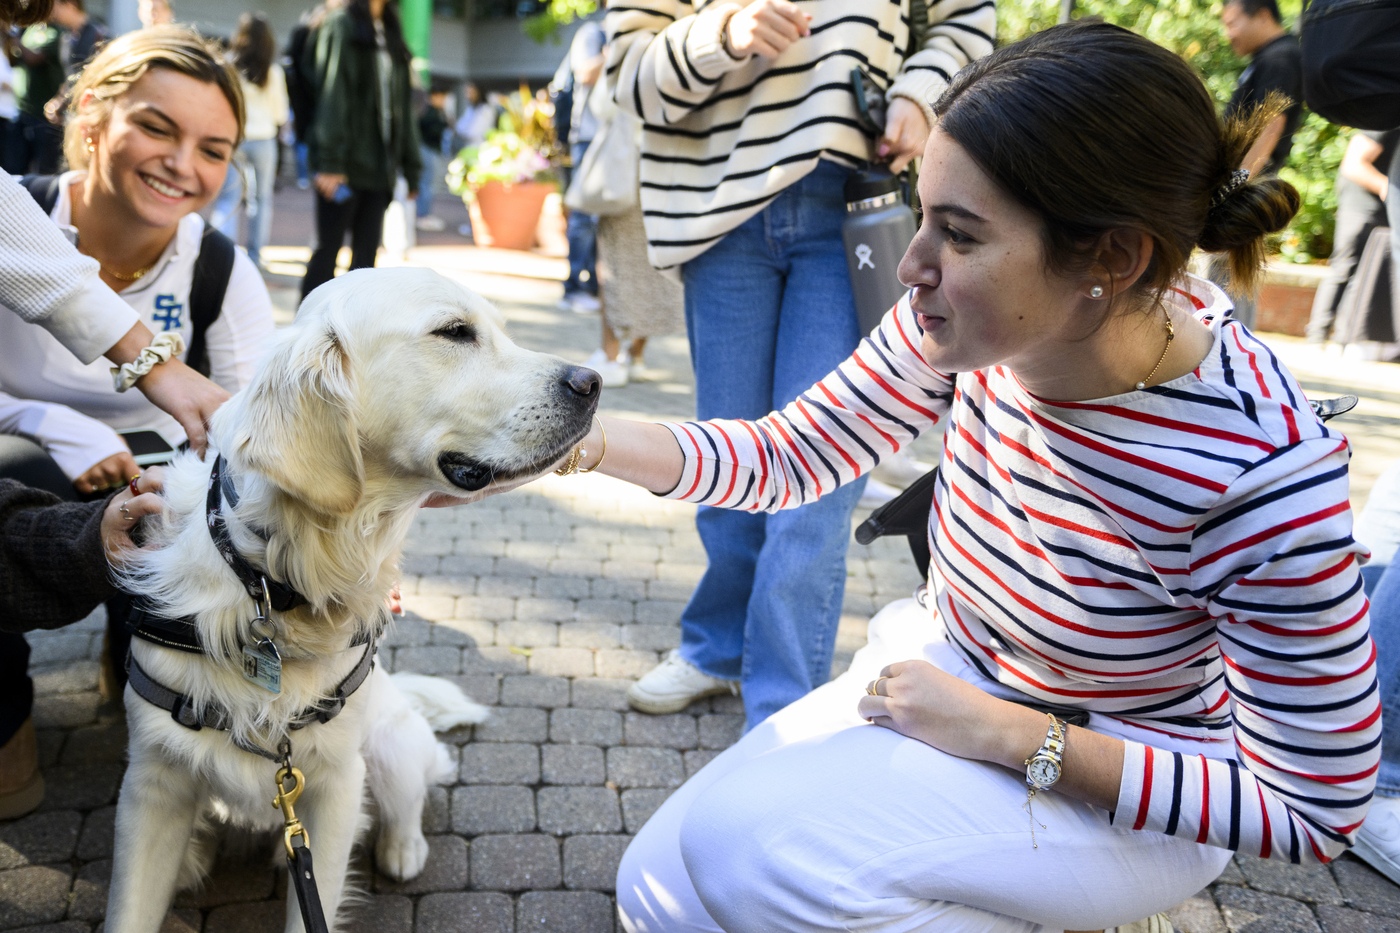 09/15/22 - BOSTON, MA. - Cooper and friends visit with members of the Northeastern community at Snell Quad to provide stress relief on Thursday, Sept. 15, 2022. Photo by Matthew Modoono/Northeastern University